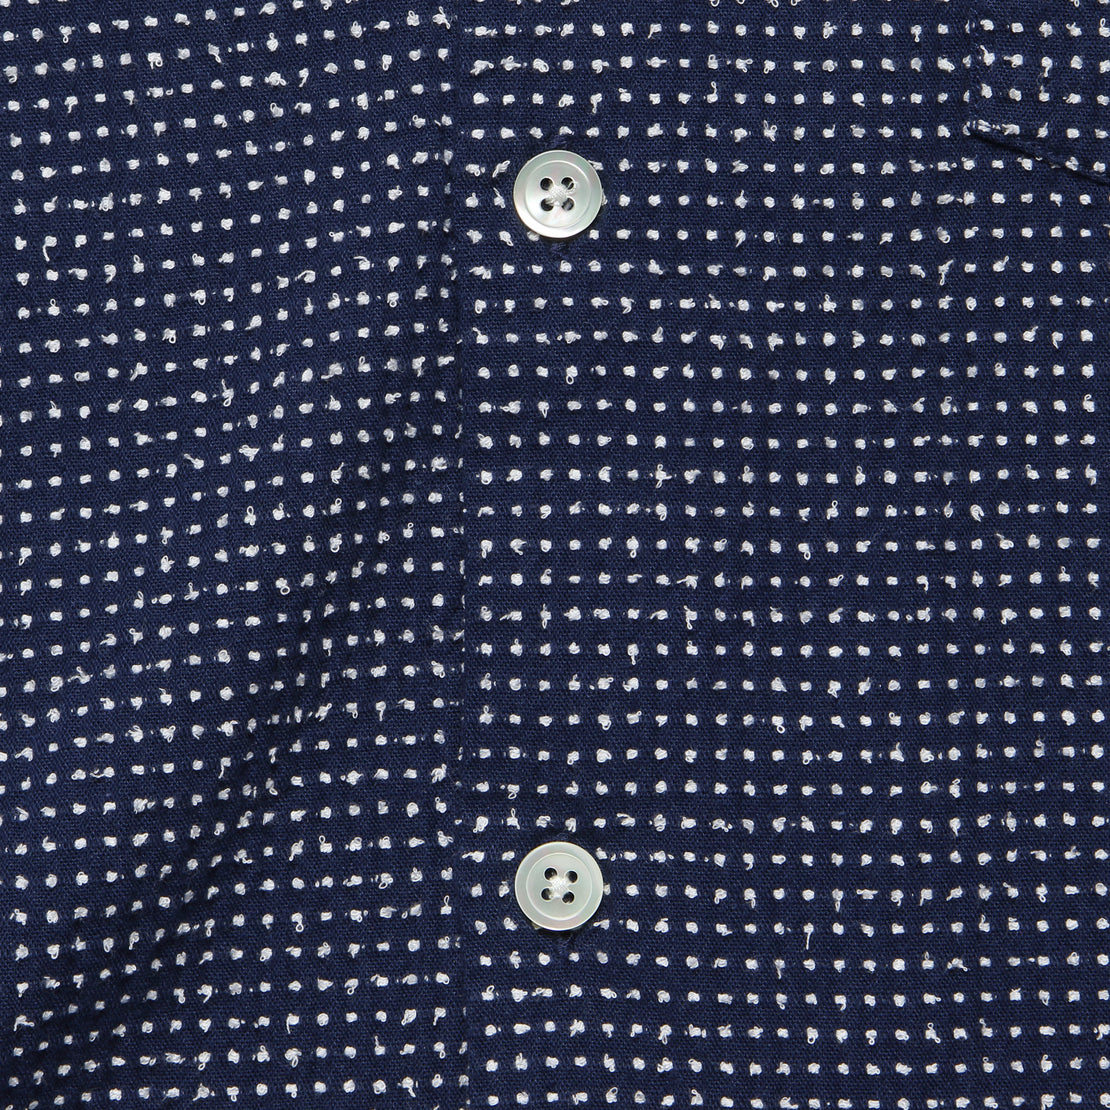 Ring Woven Dot Shirt - Navy - Portuguese Flannel - STAG Provisions - Tops - S/S Woven - Dot